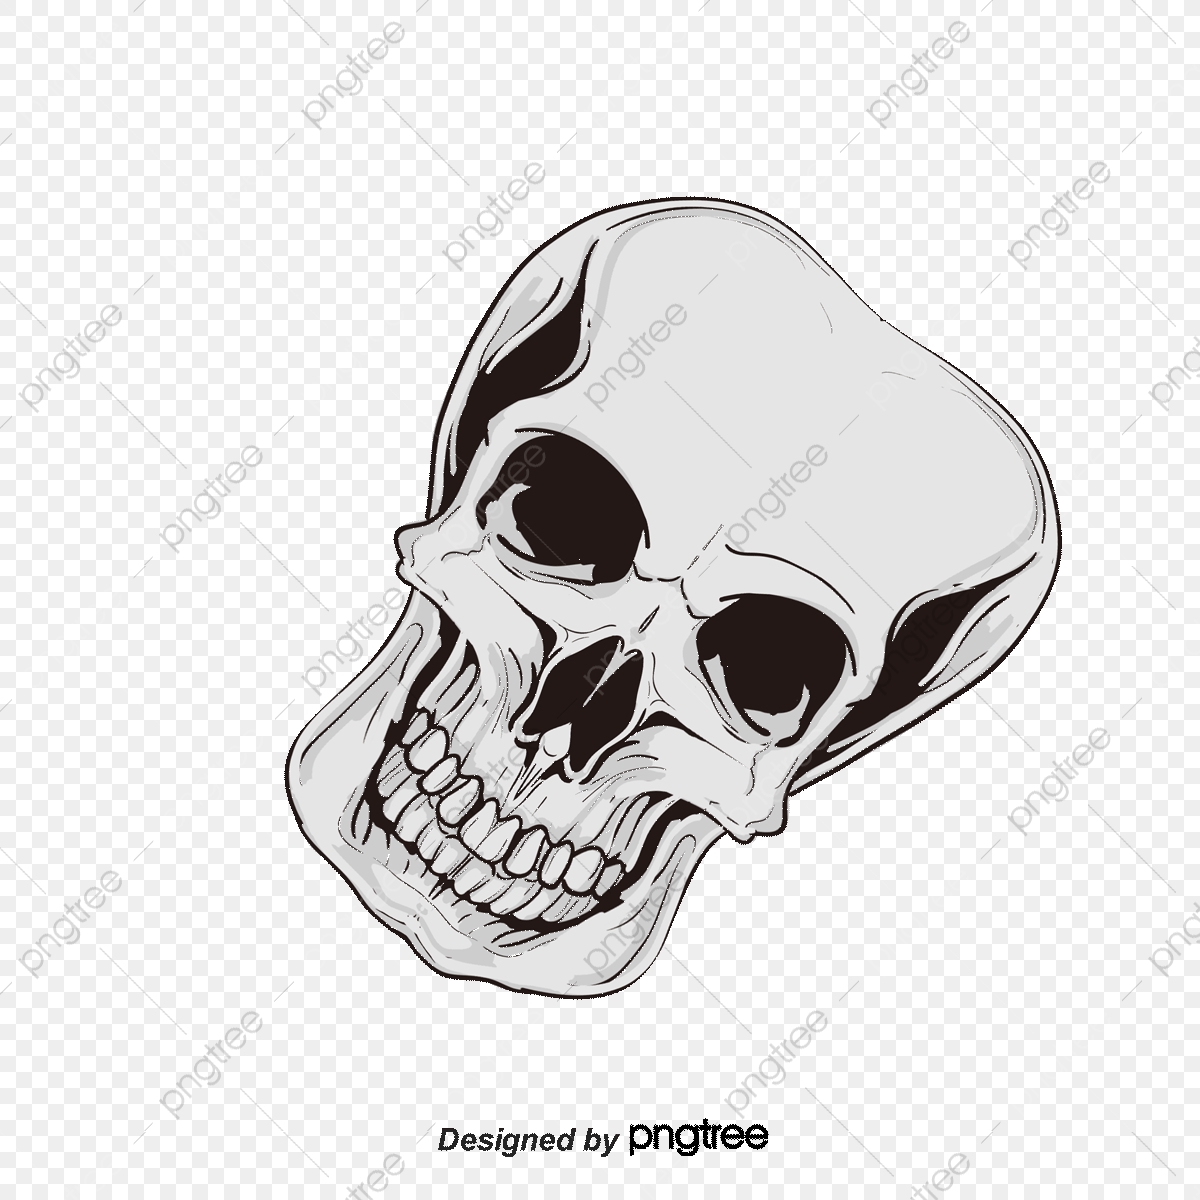 Hand Painted Skull Vector, Skull, Bone, Hand Painted PNG and.